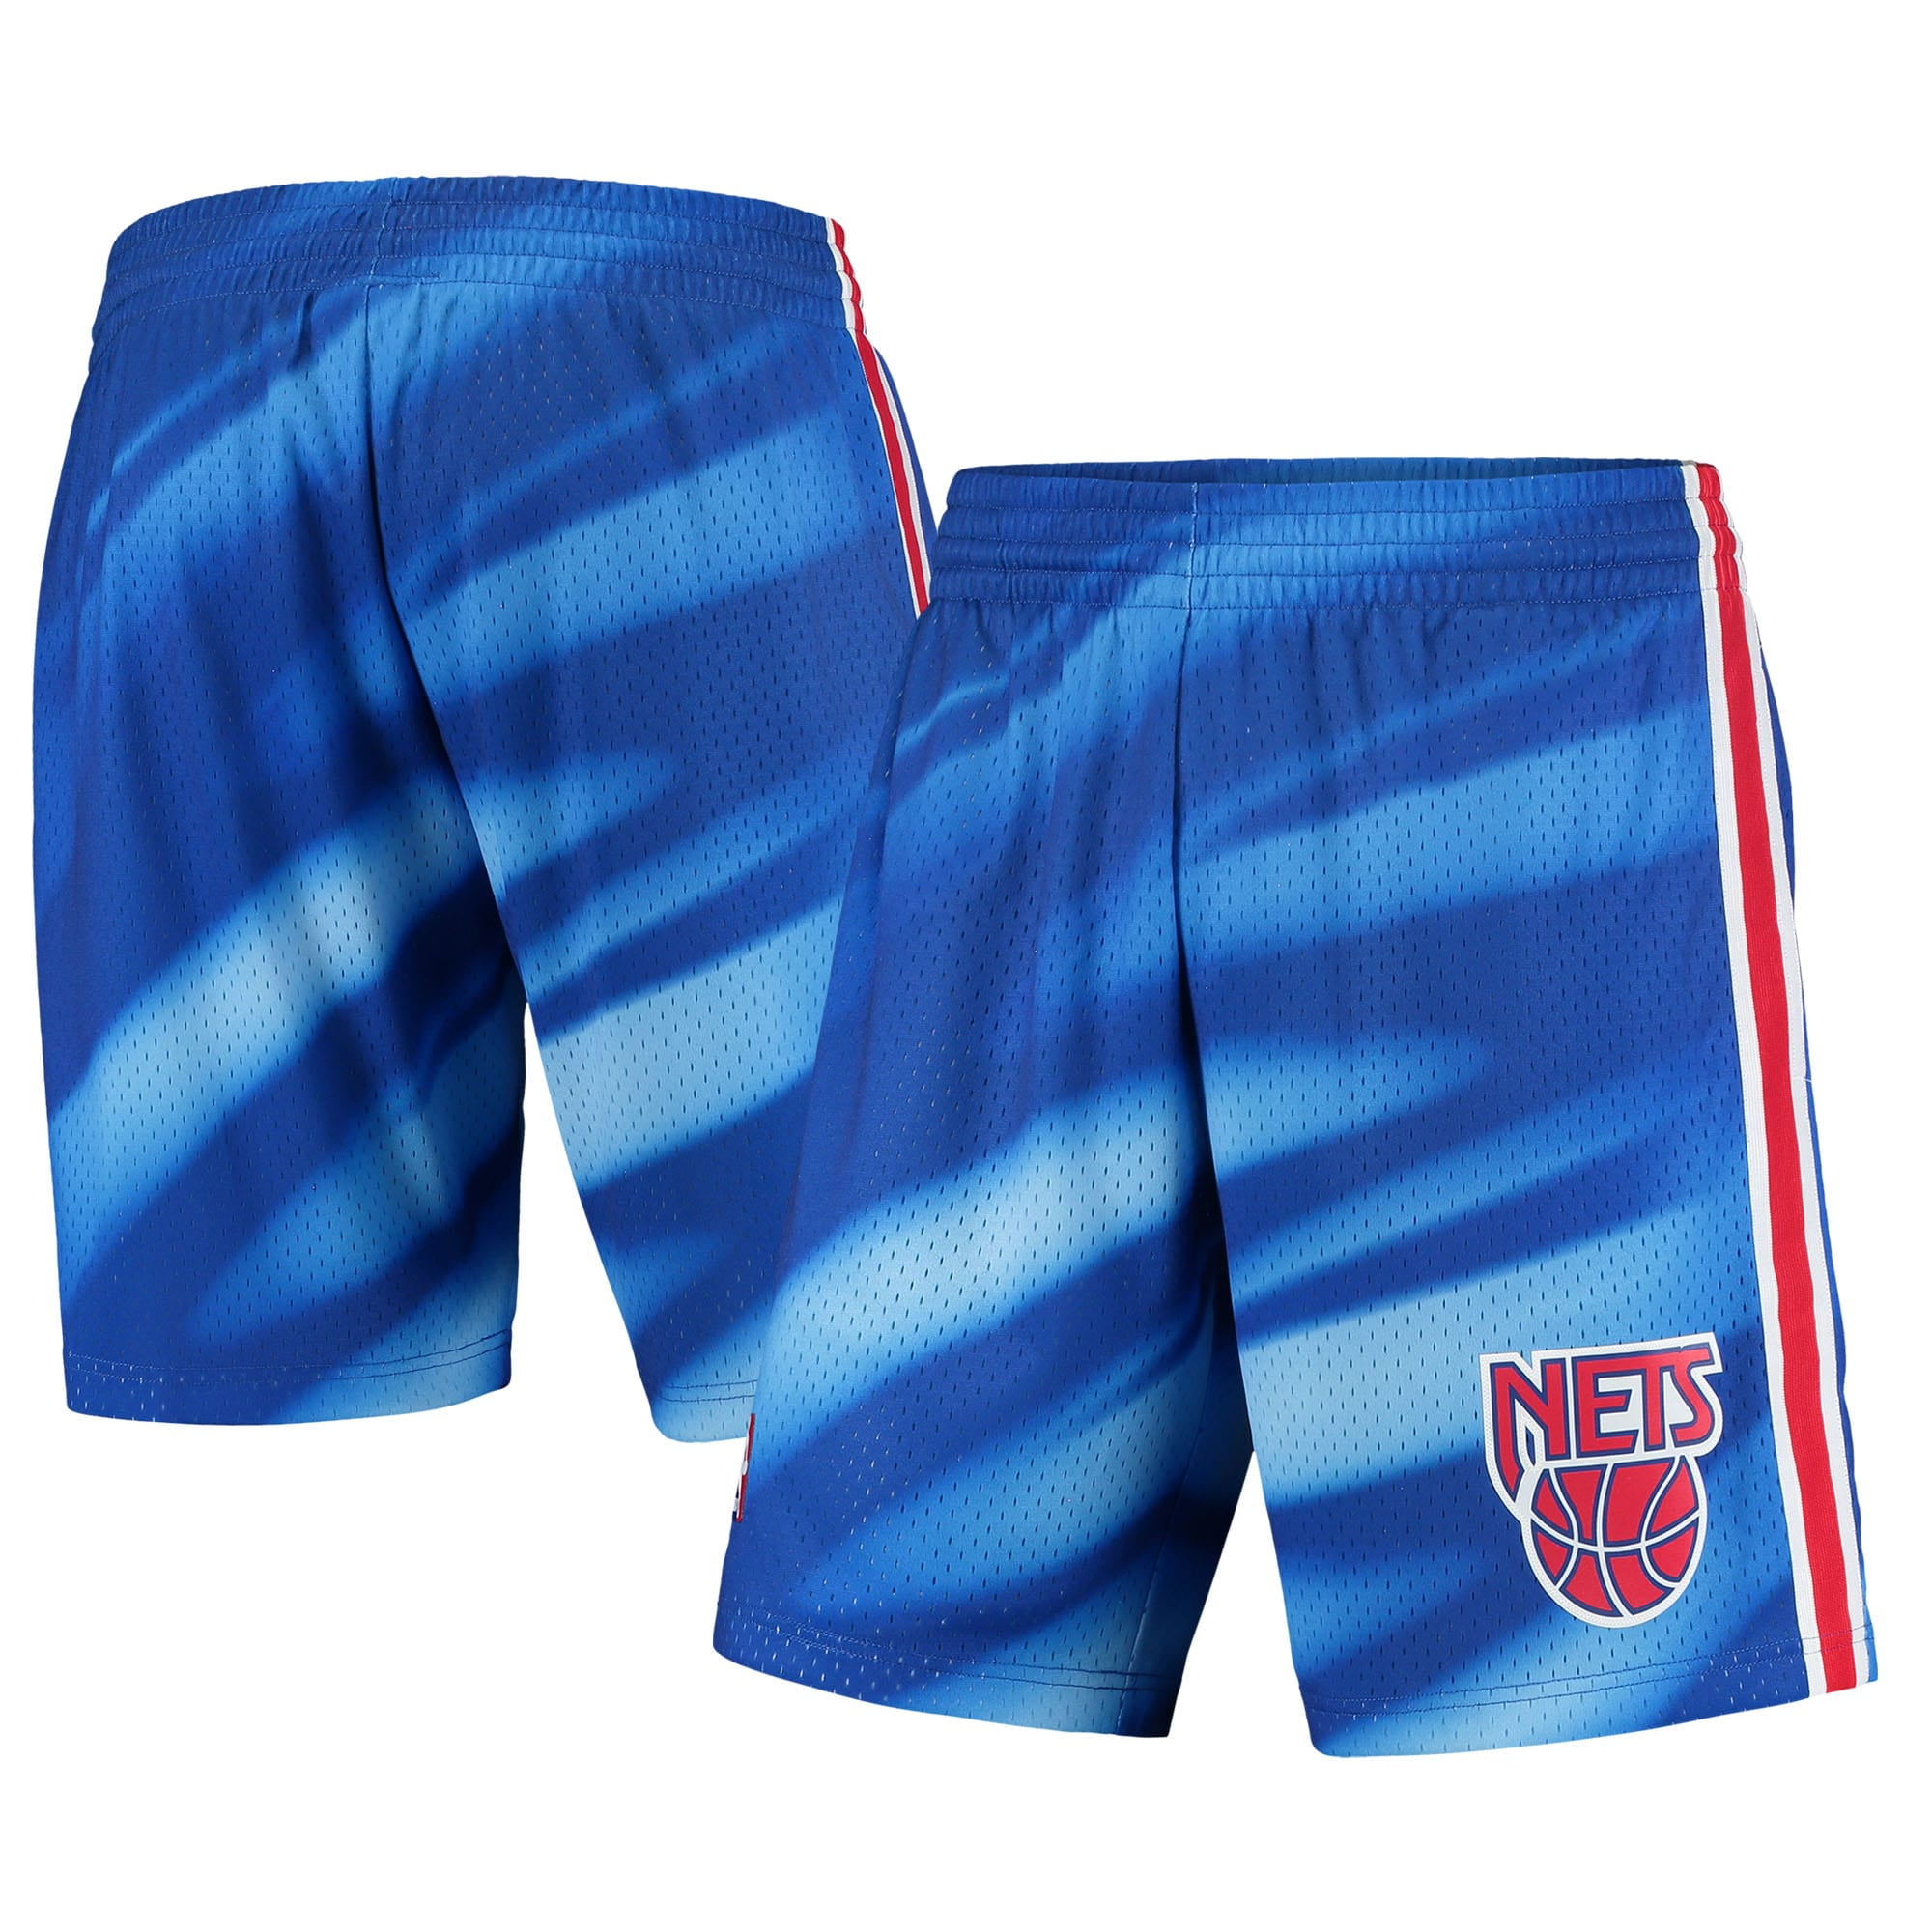  Outerstuff NBA Big Boys Youth (8-20) Free Throw Shorts